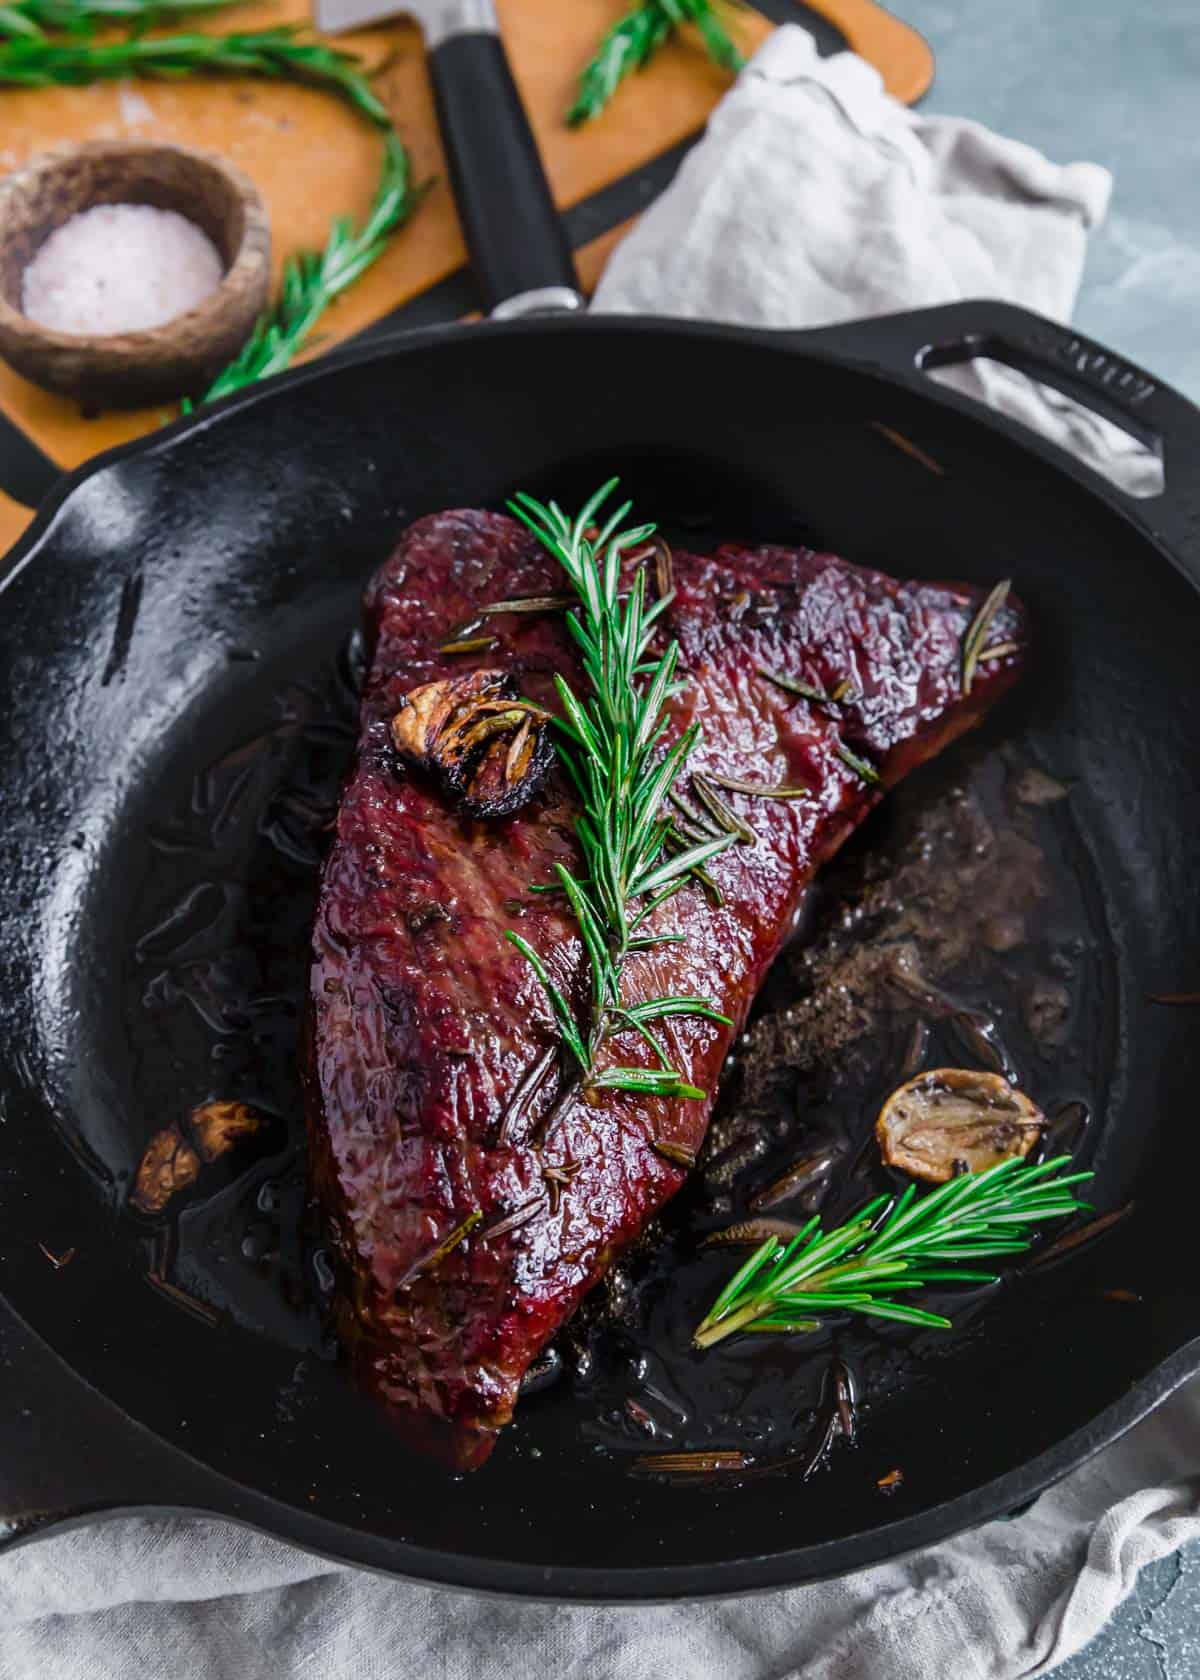 Tri tip in a cast iron skillet with rosemary sprigs and garlic.